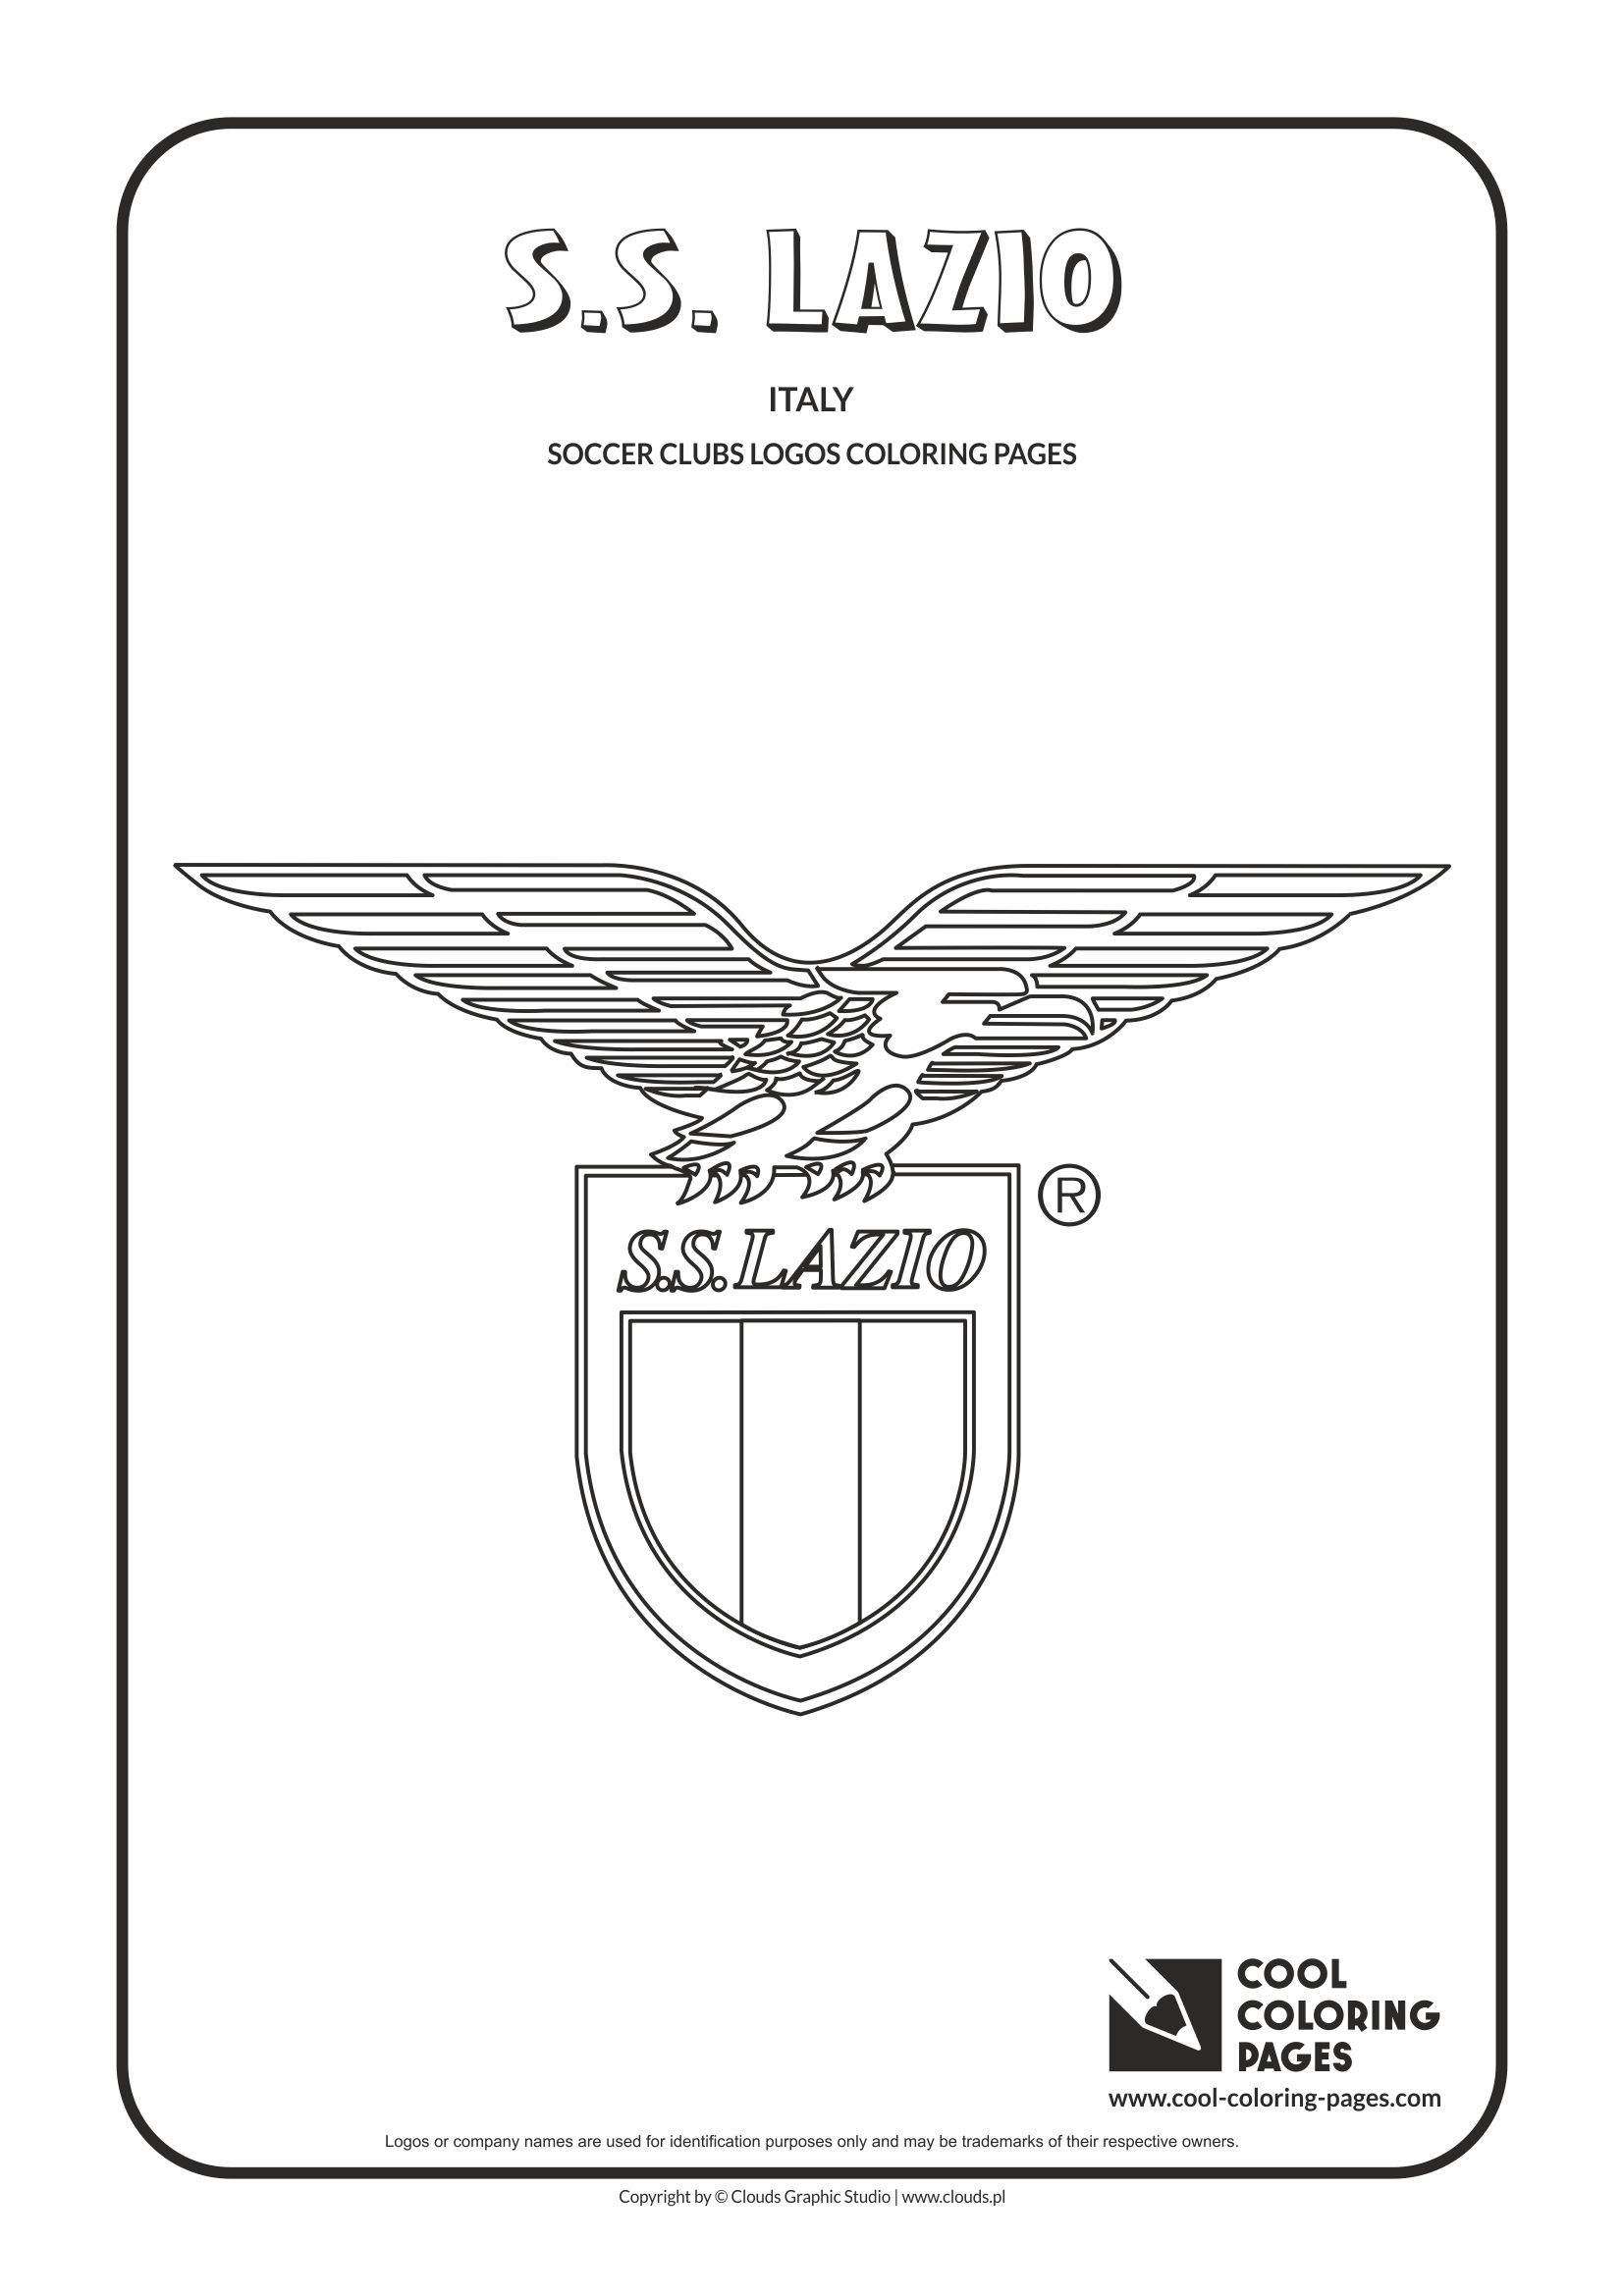 S.S. Lazio logo coloring / Coloring page with S.S. Lazio logo / S.S. Lazio logo colouring page.